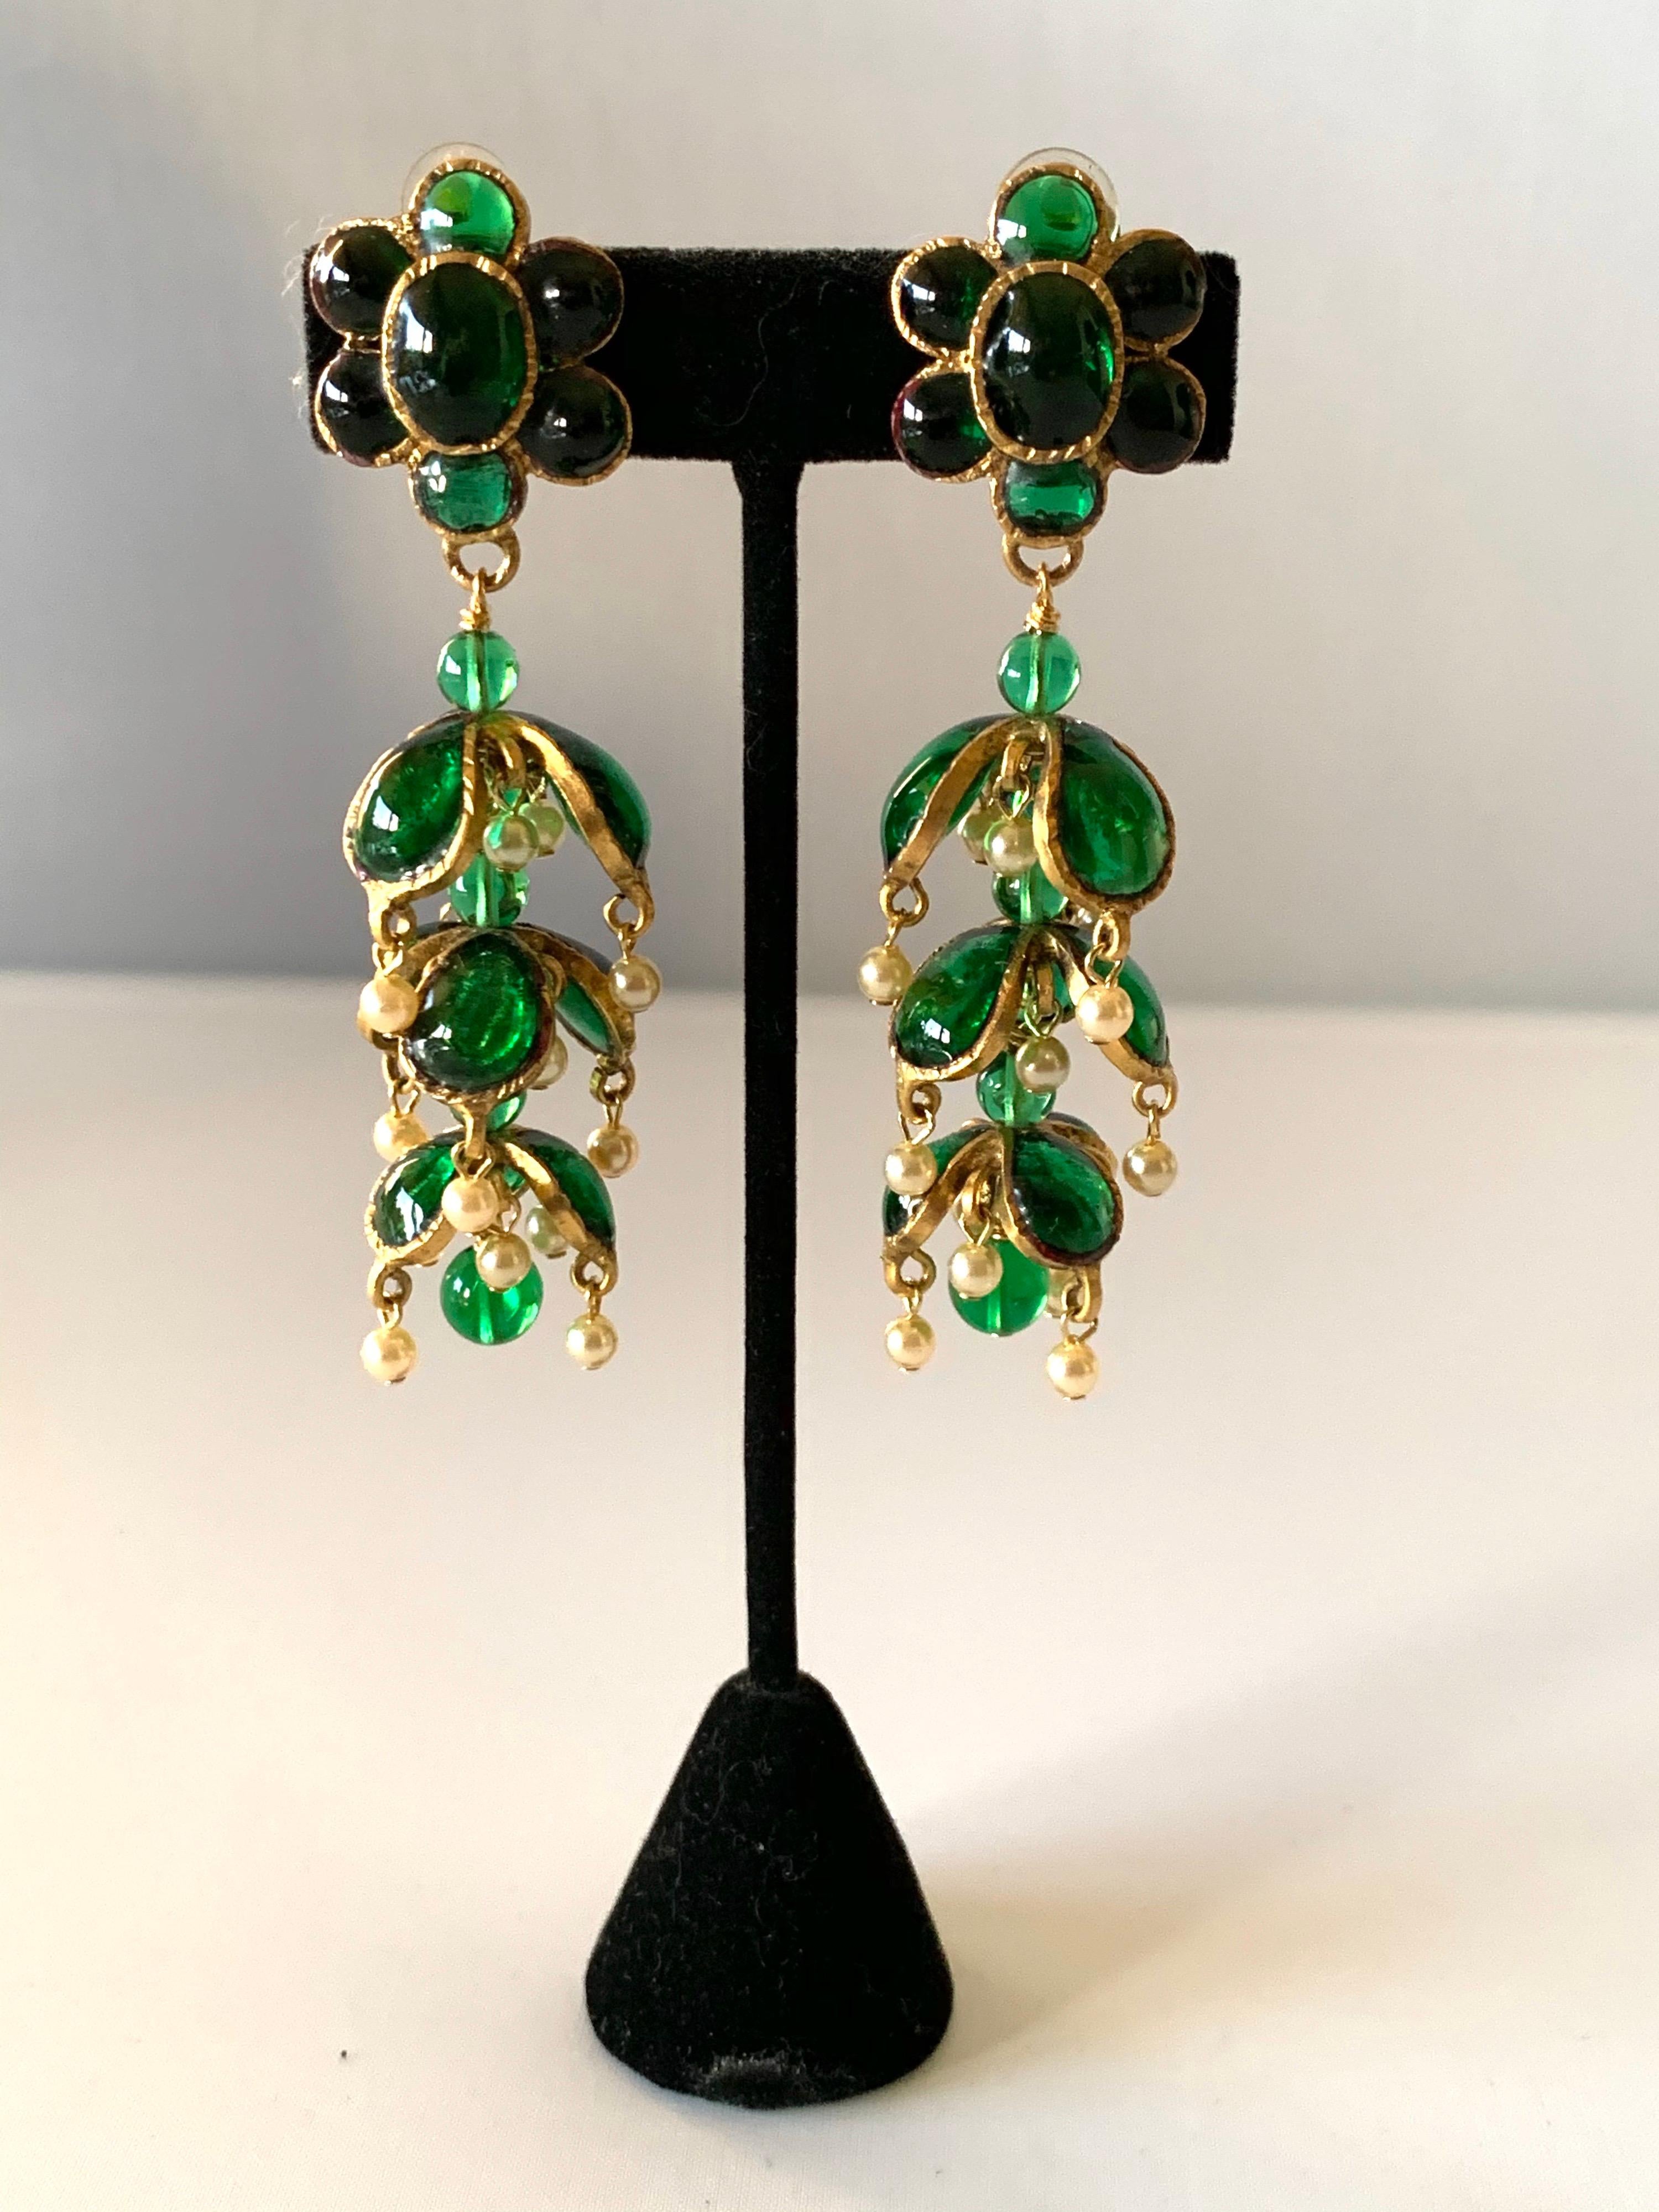 Exquisite vintage Coco Chanel Mughal style statement clip-on earrings. The long earrings are comprised of gilt metal 